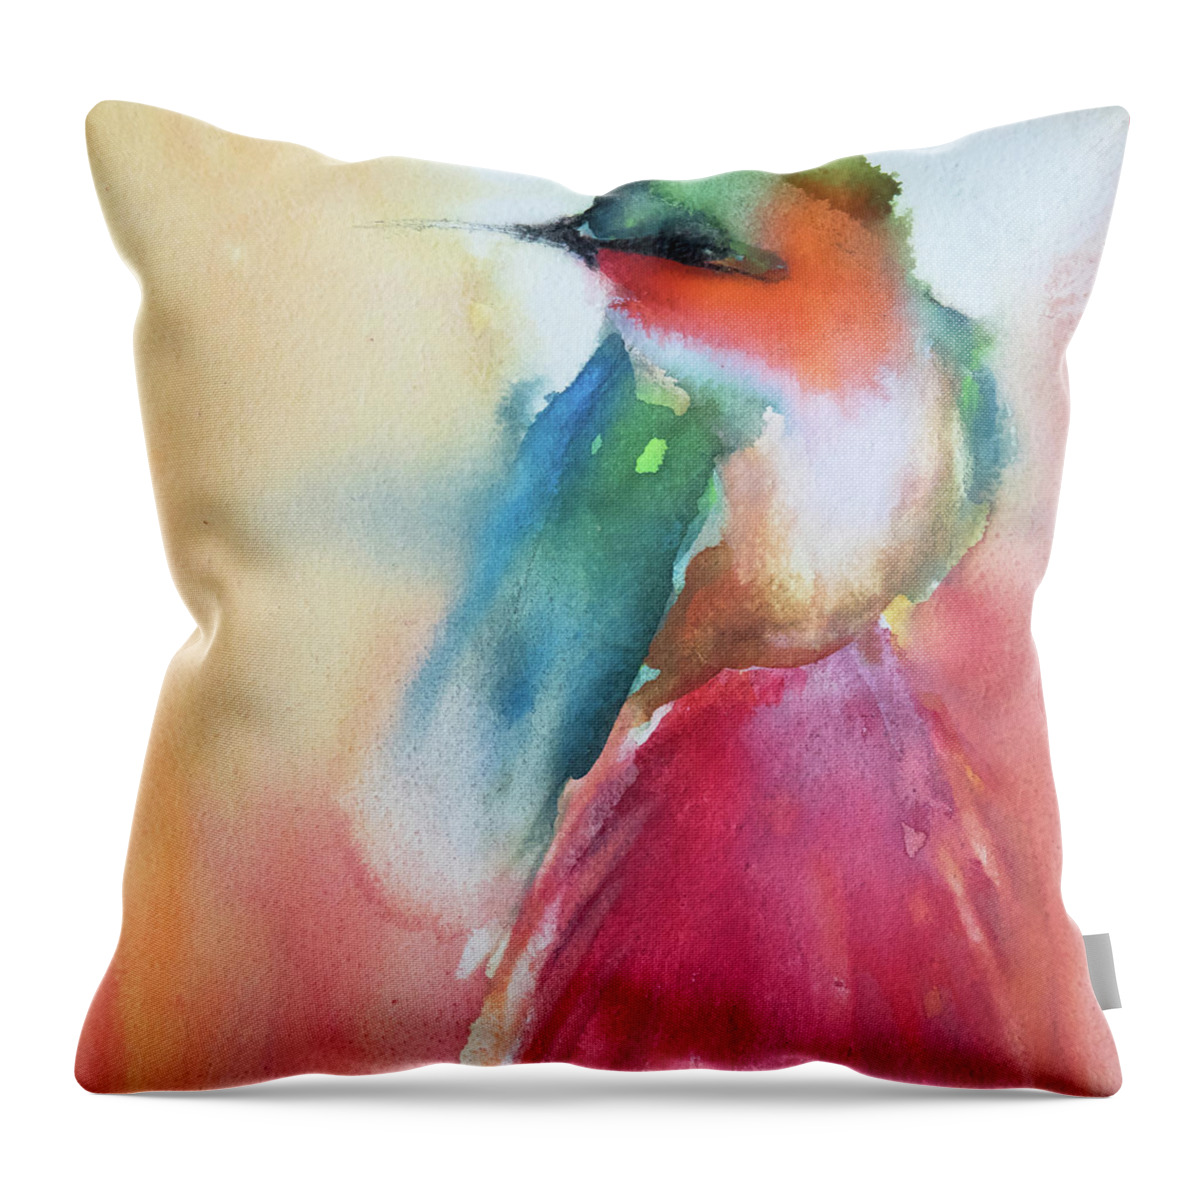 Hummingbird Throw Pillow featuring the painting Be Still And Know by Jani Freimann